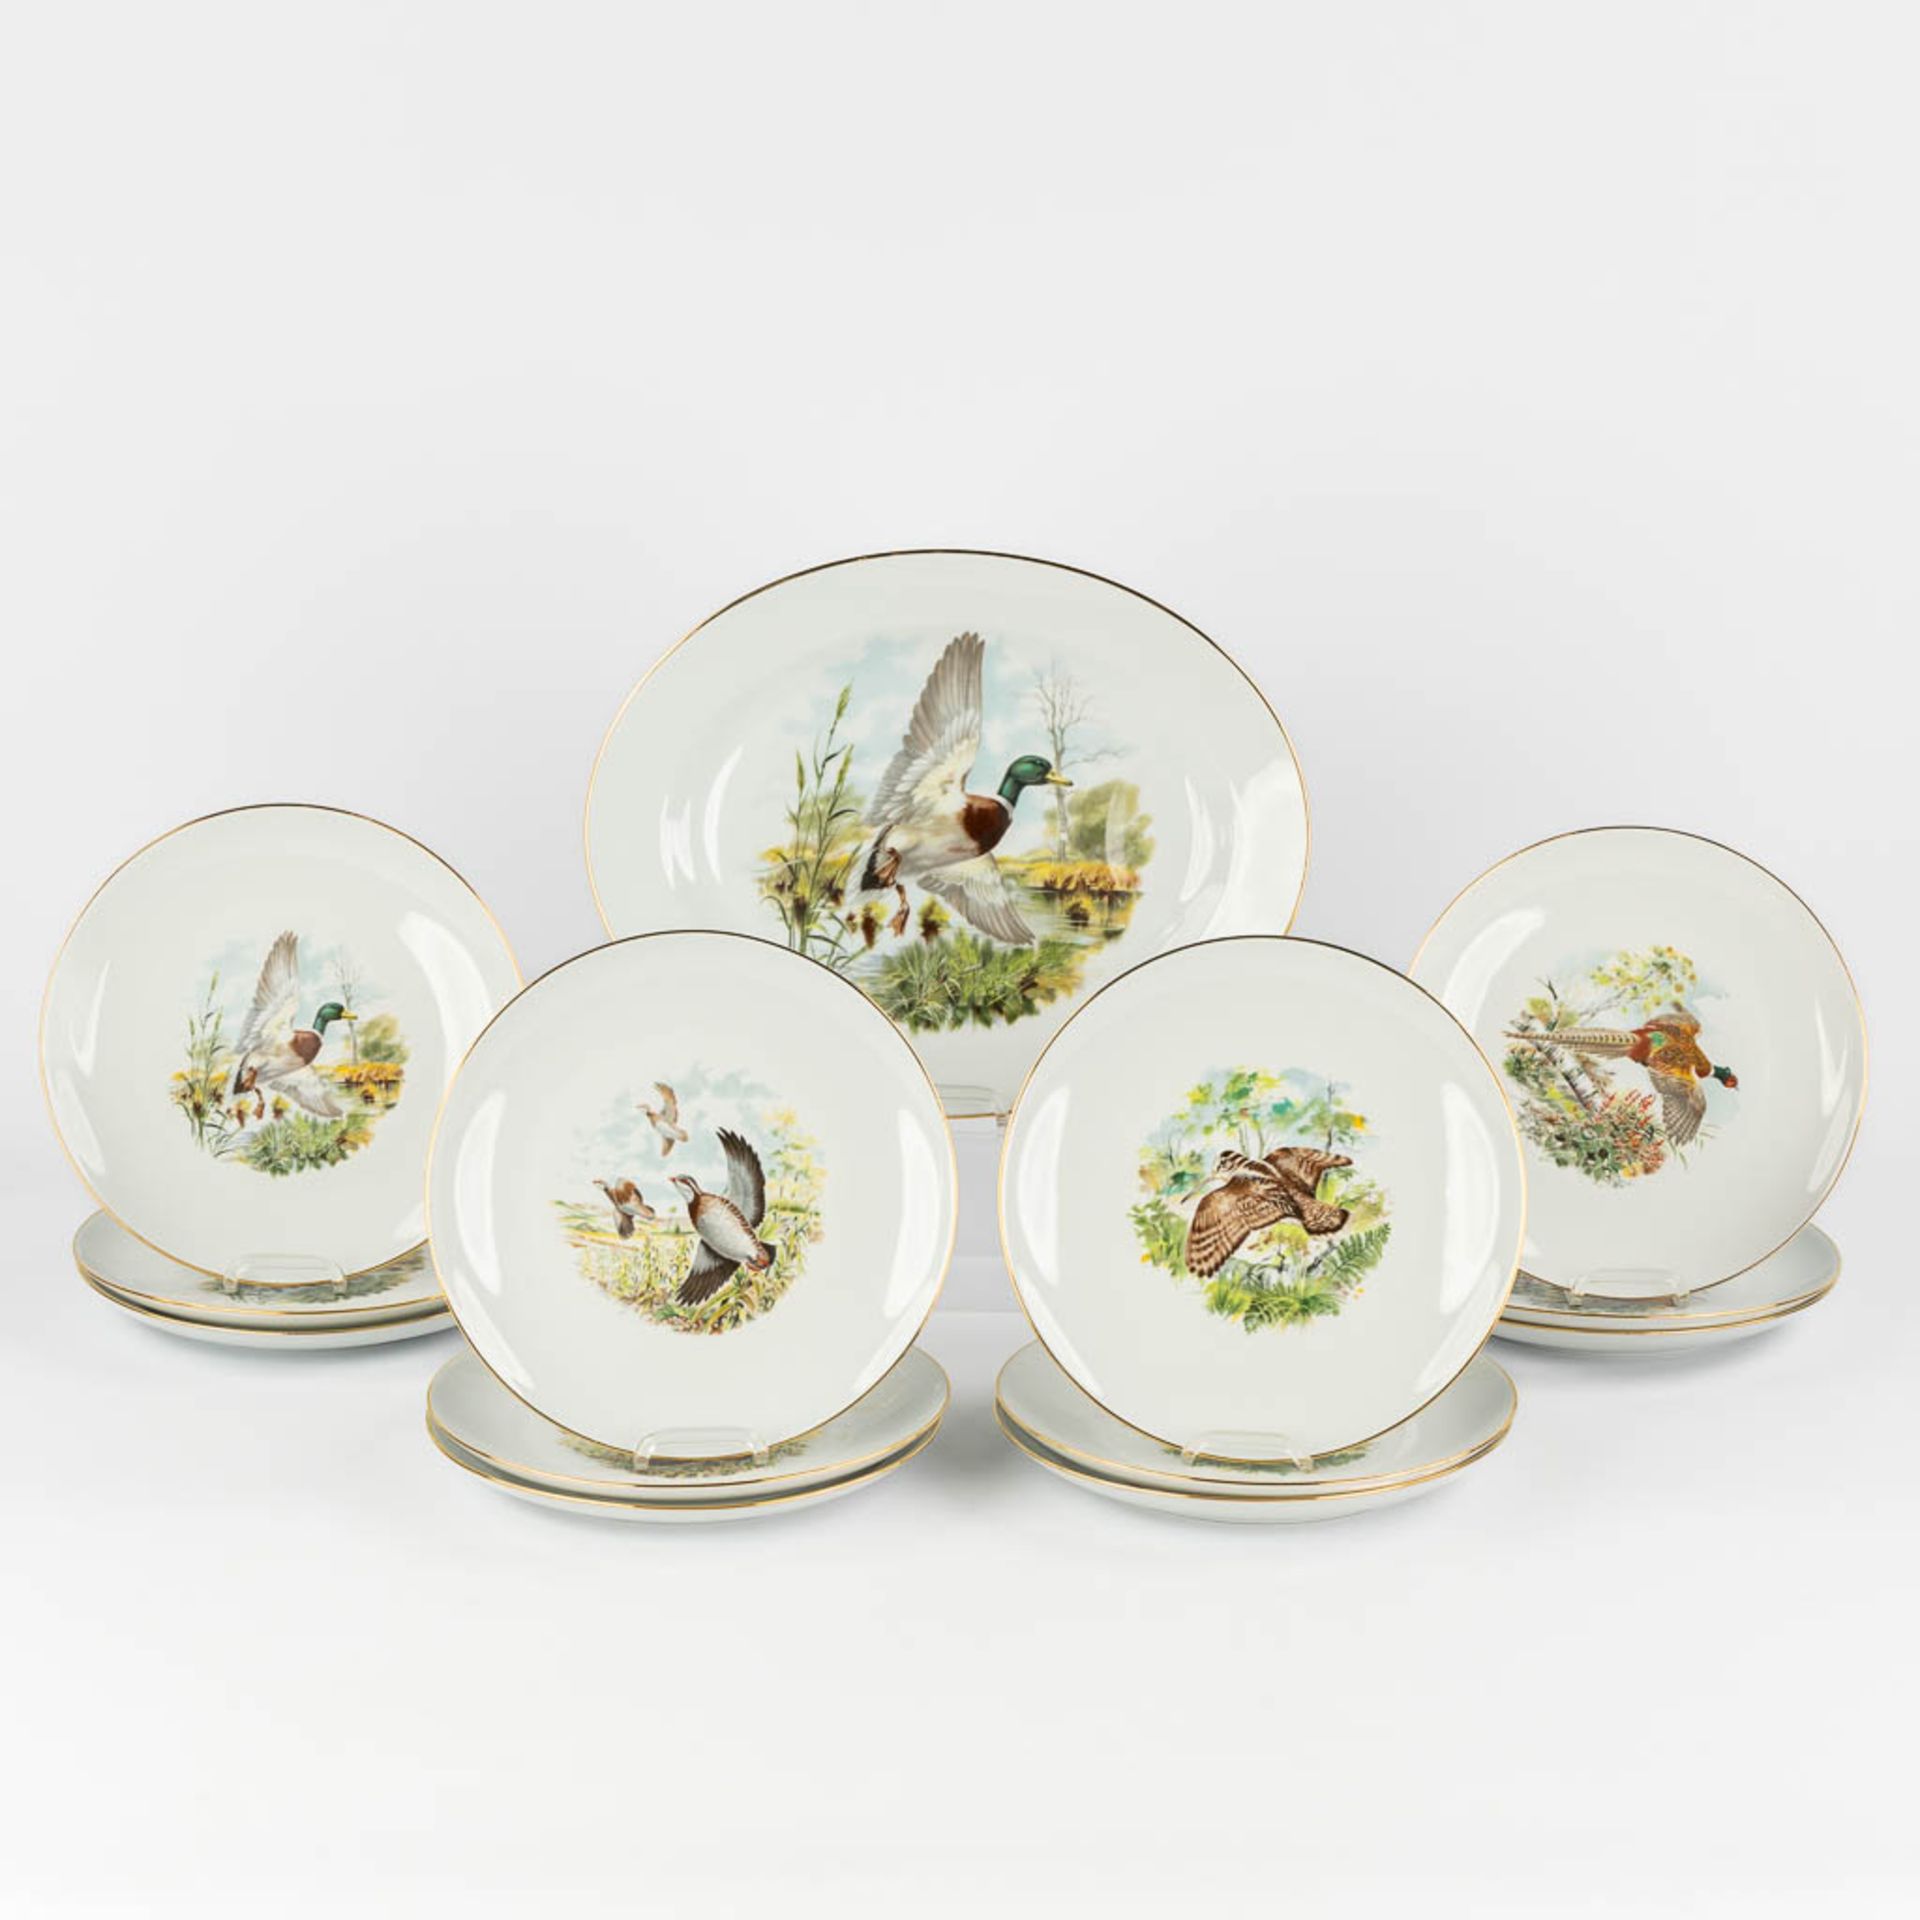 Limoges, France, a large, 12-person dinner, wild and coffee service. (L:23 x W:34 x H:22 cm) - Image 19 of 28